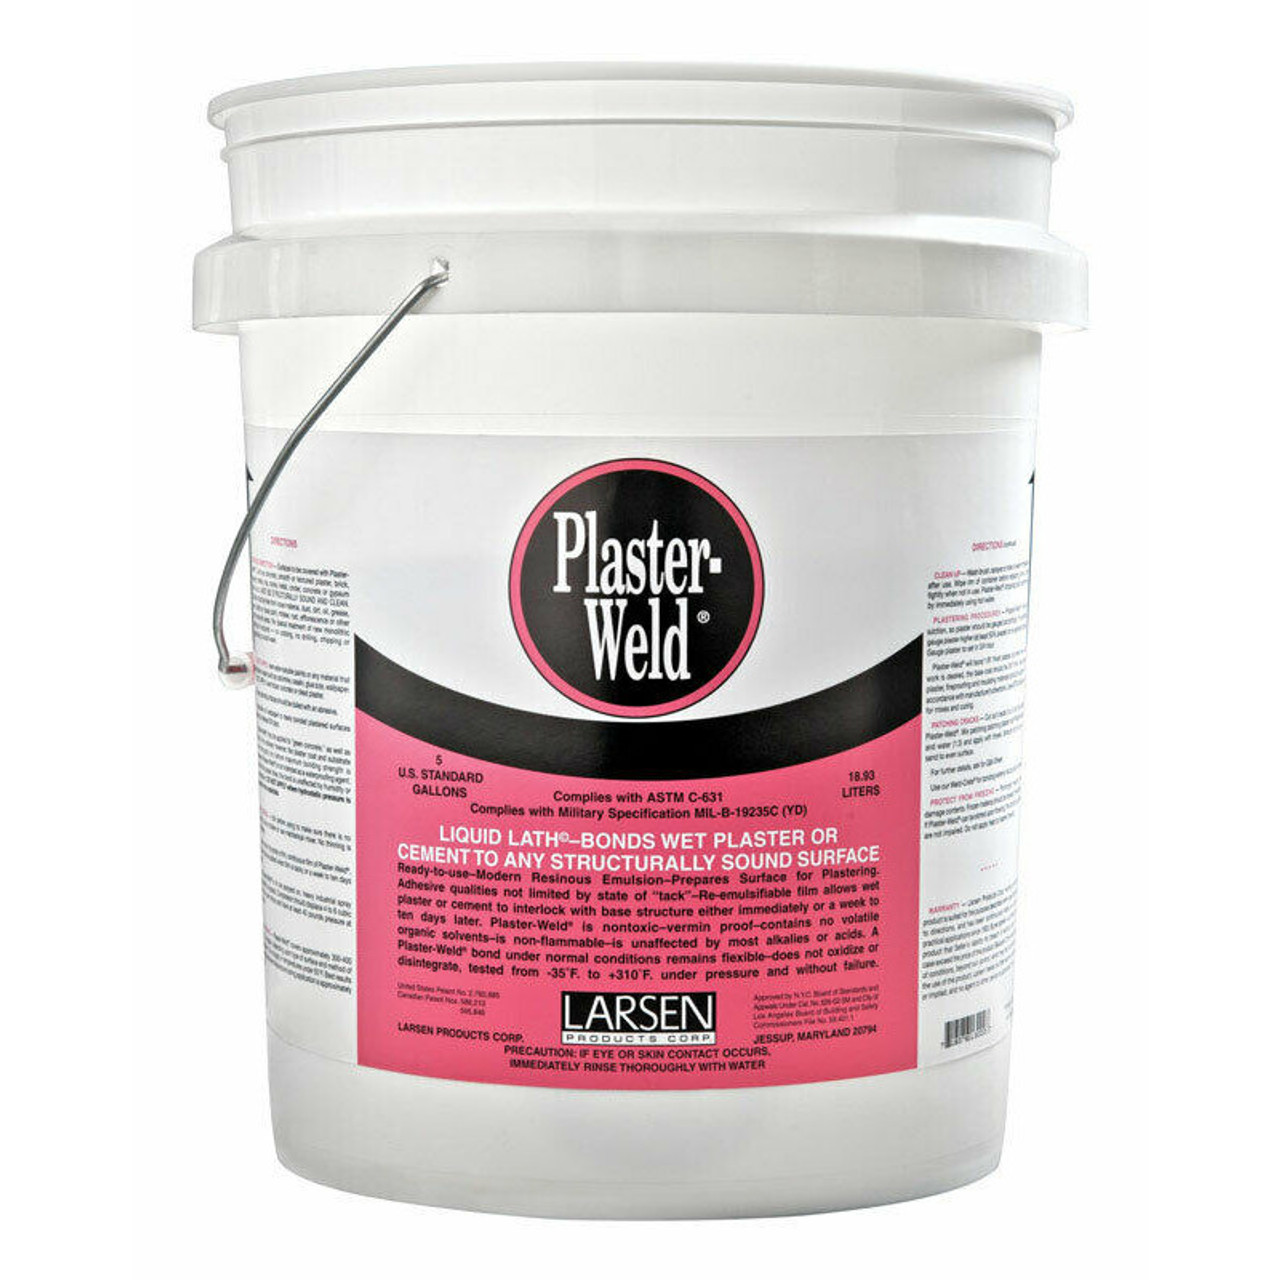 Plaster-Weld® bonds new plaster to any clean, structurally sound, interior  surface